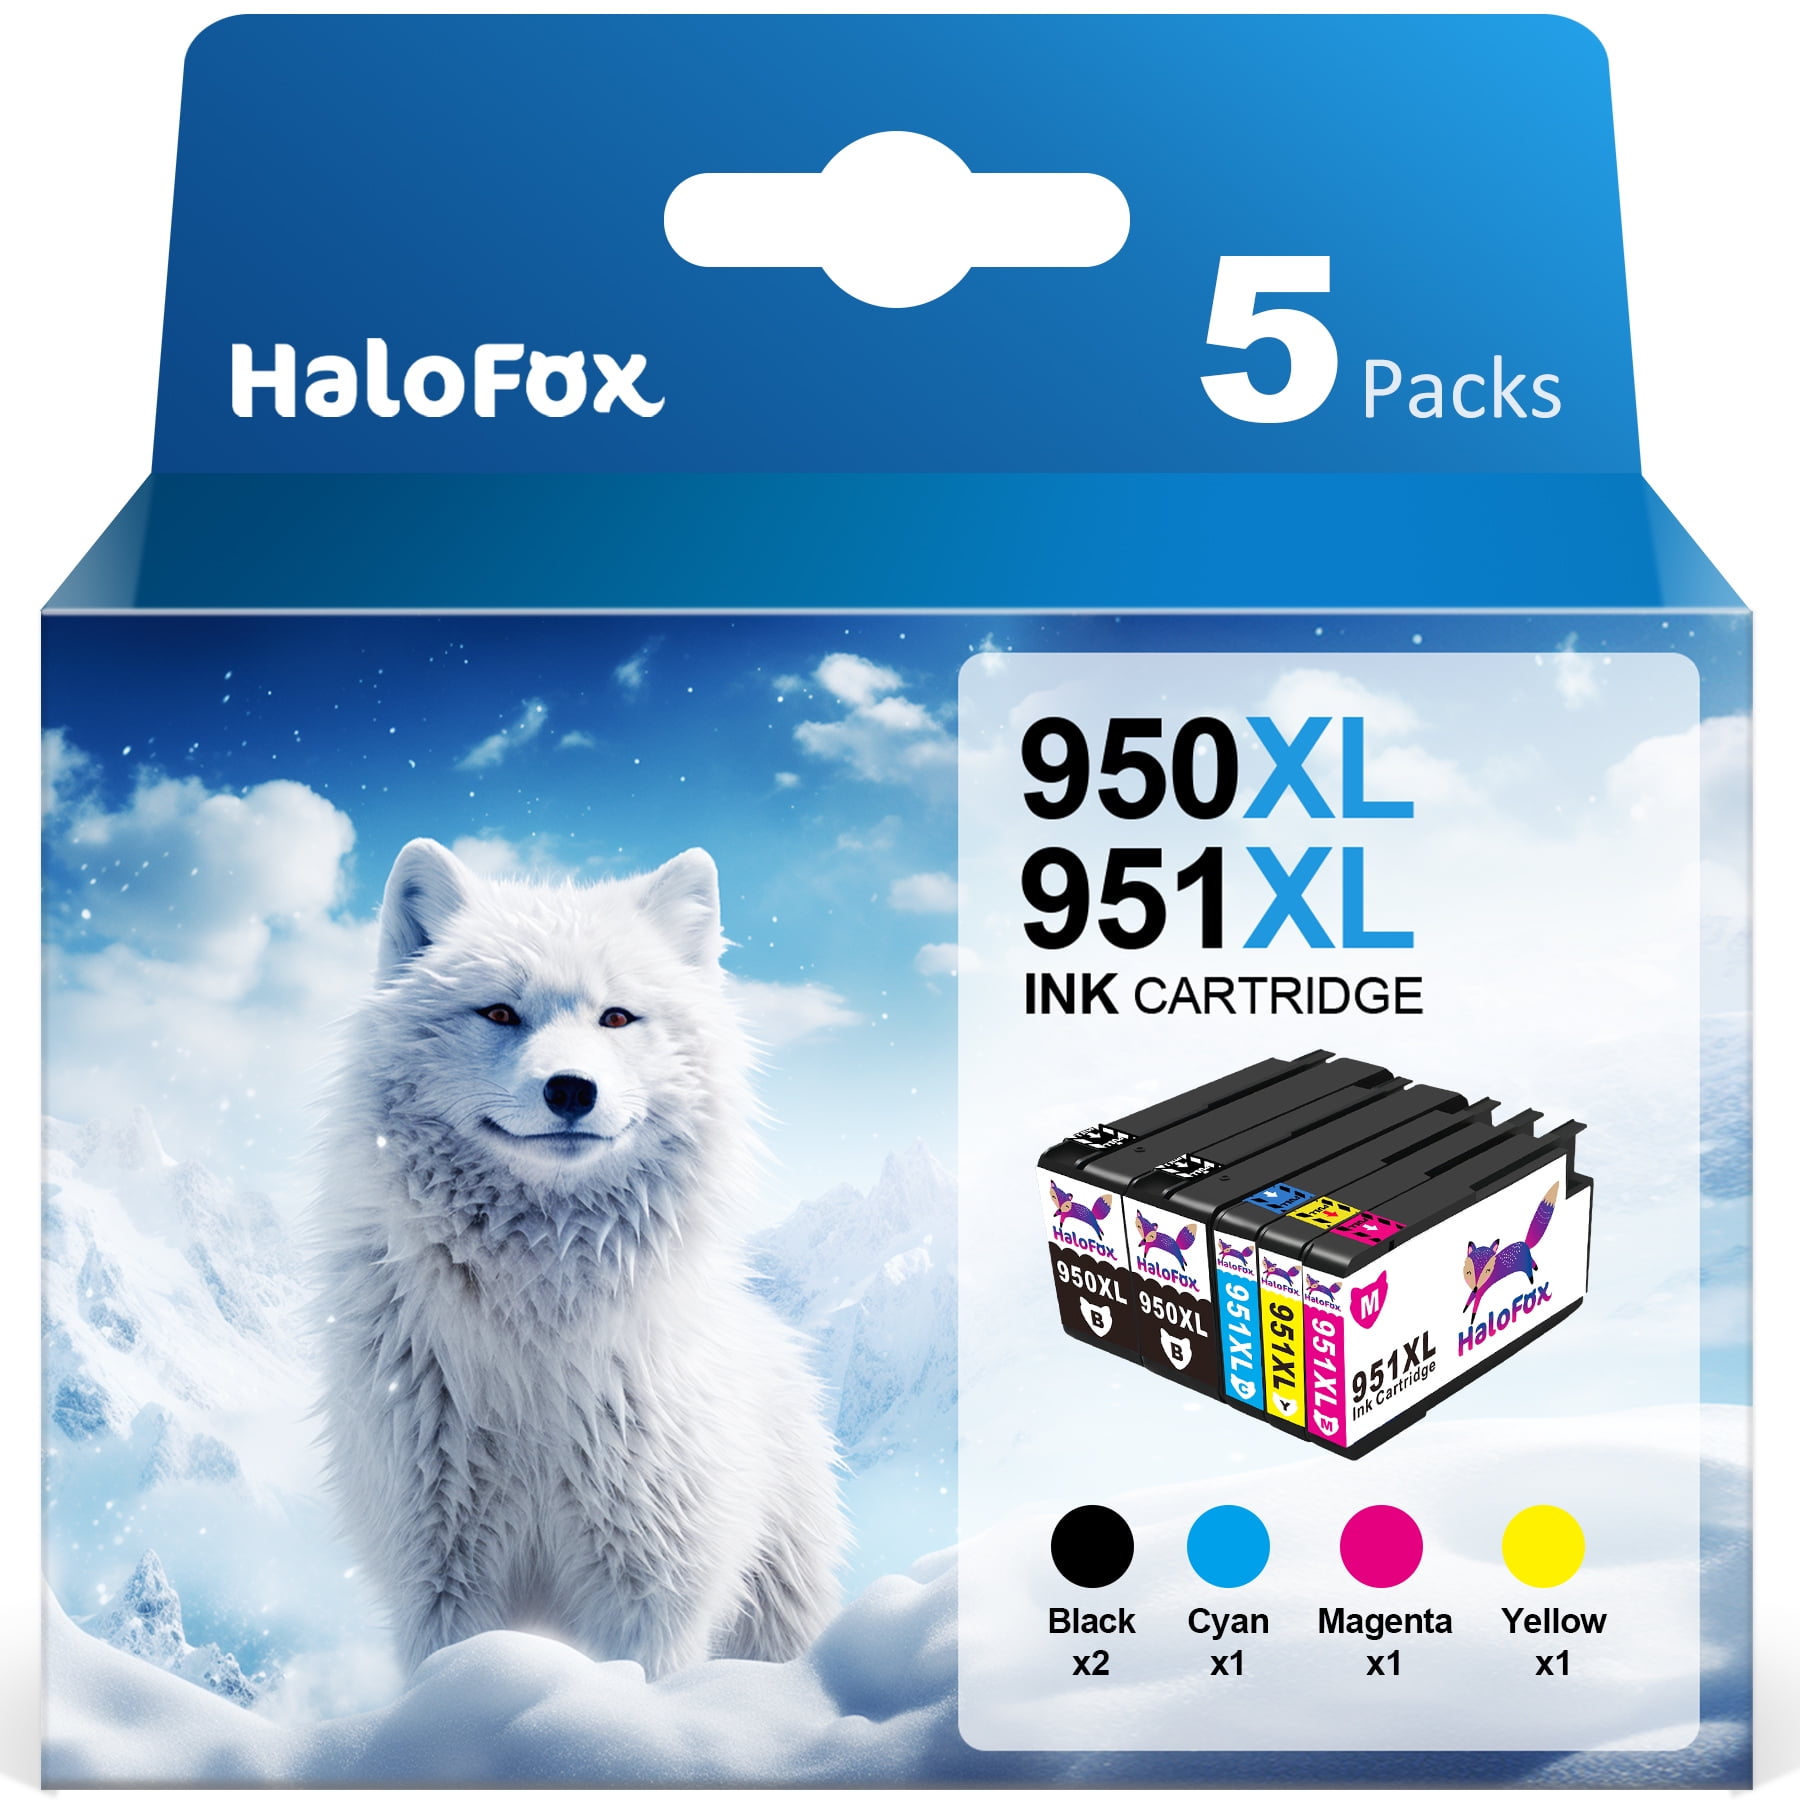 950XL and 951 Combo Pack Ink Cartridge for HP Printers OfficeJet Pro 8600  8610 8620 8100 8630 8660 8640 8615 8625 276DW 251DW(1 Black, 1 Cyan, 1